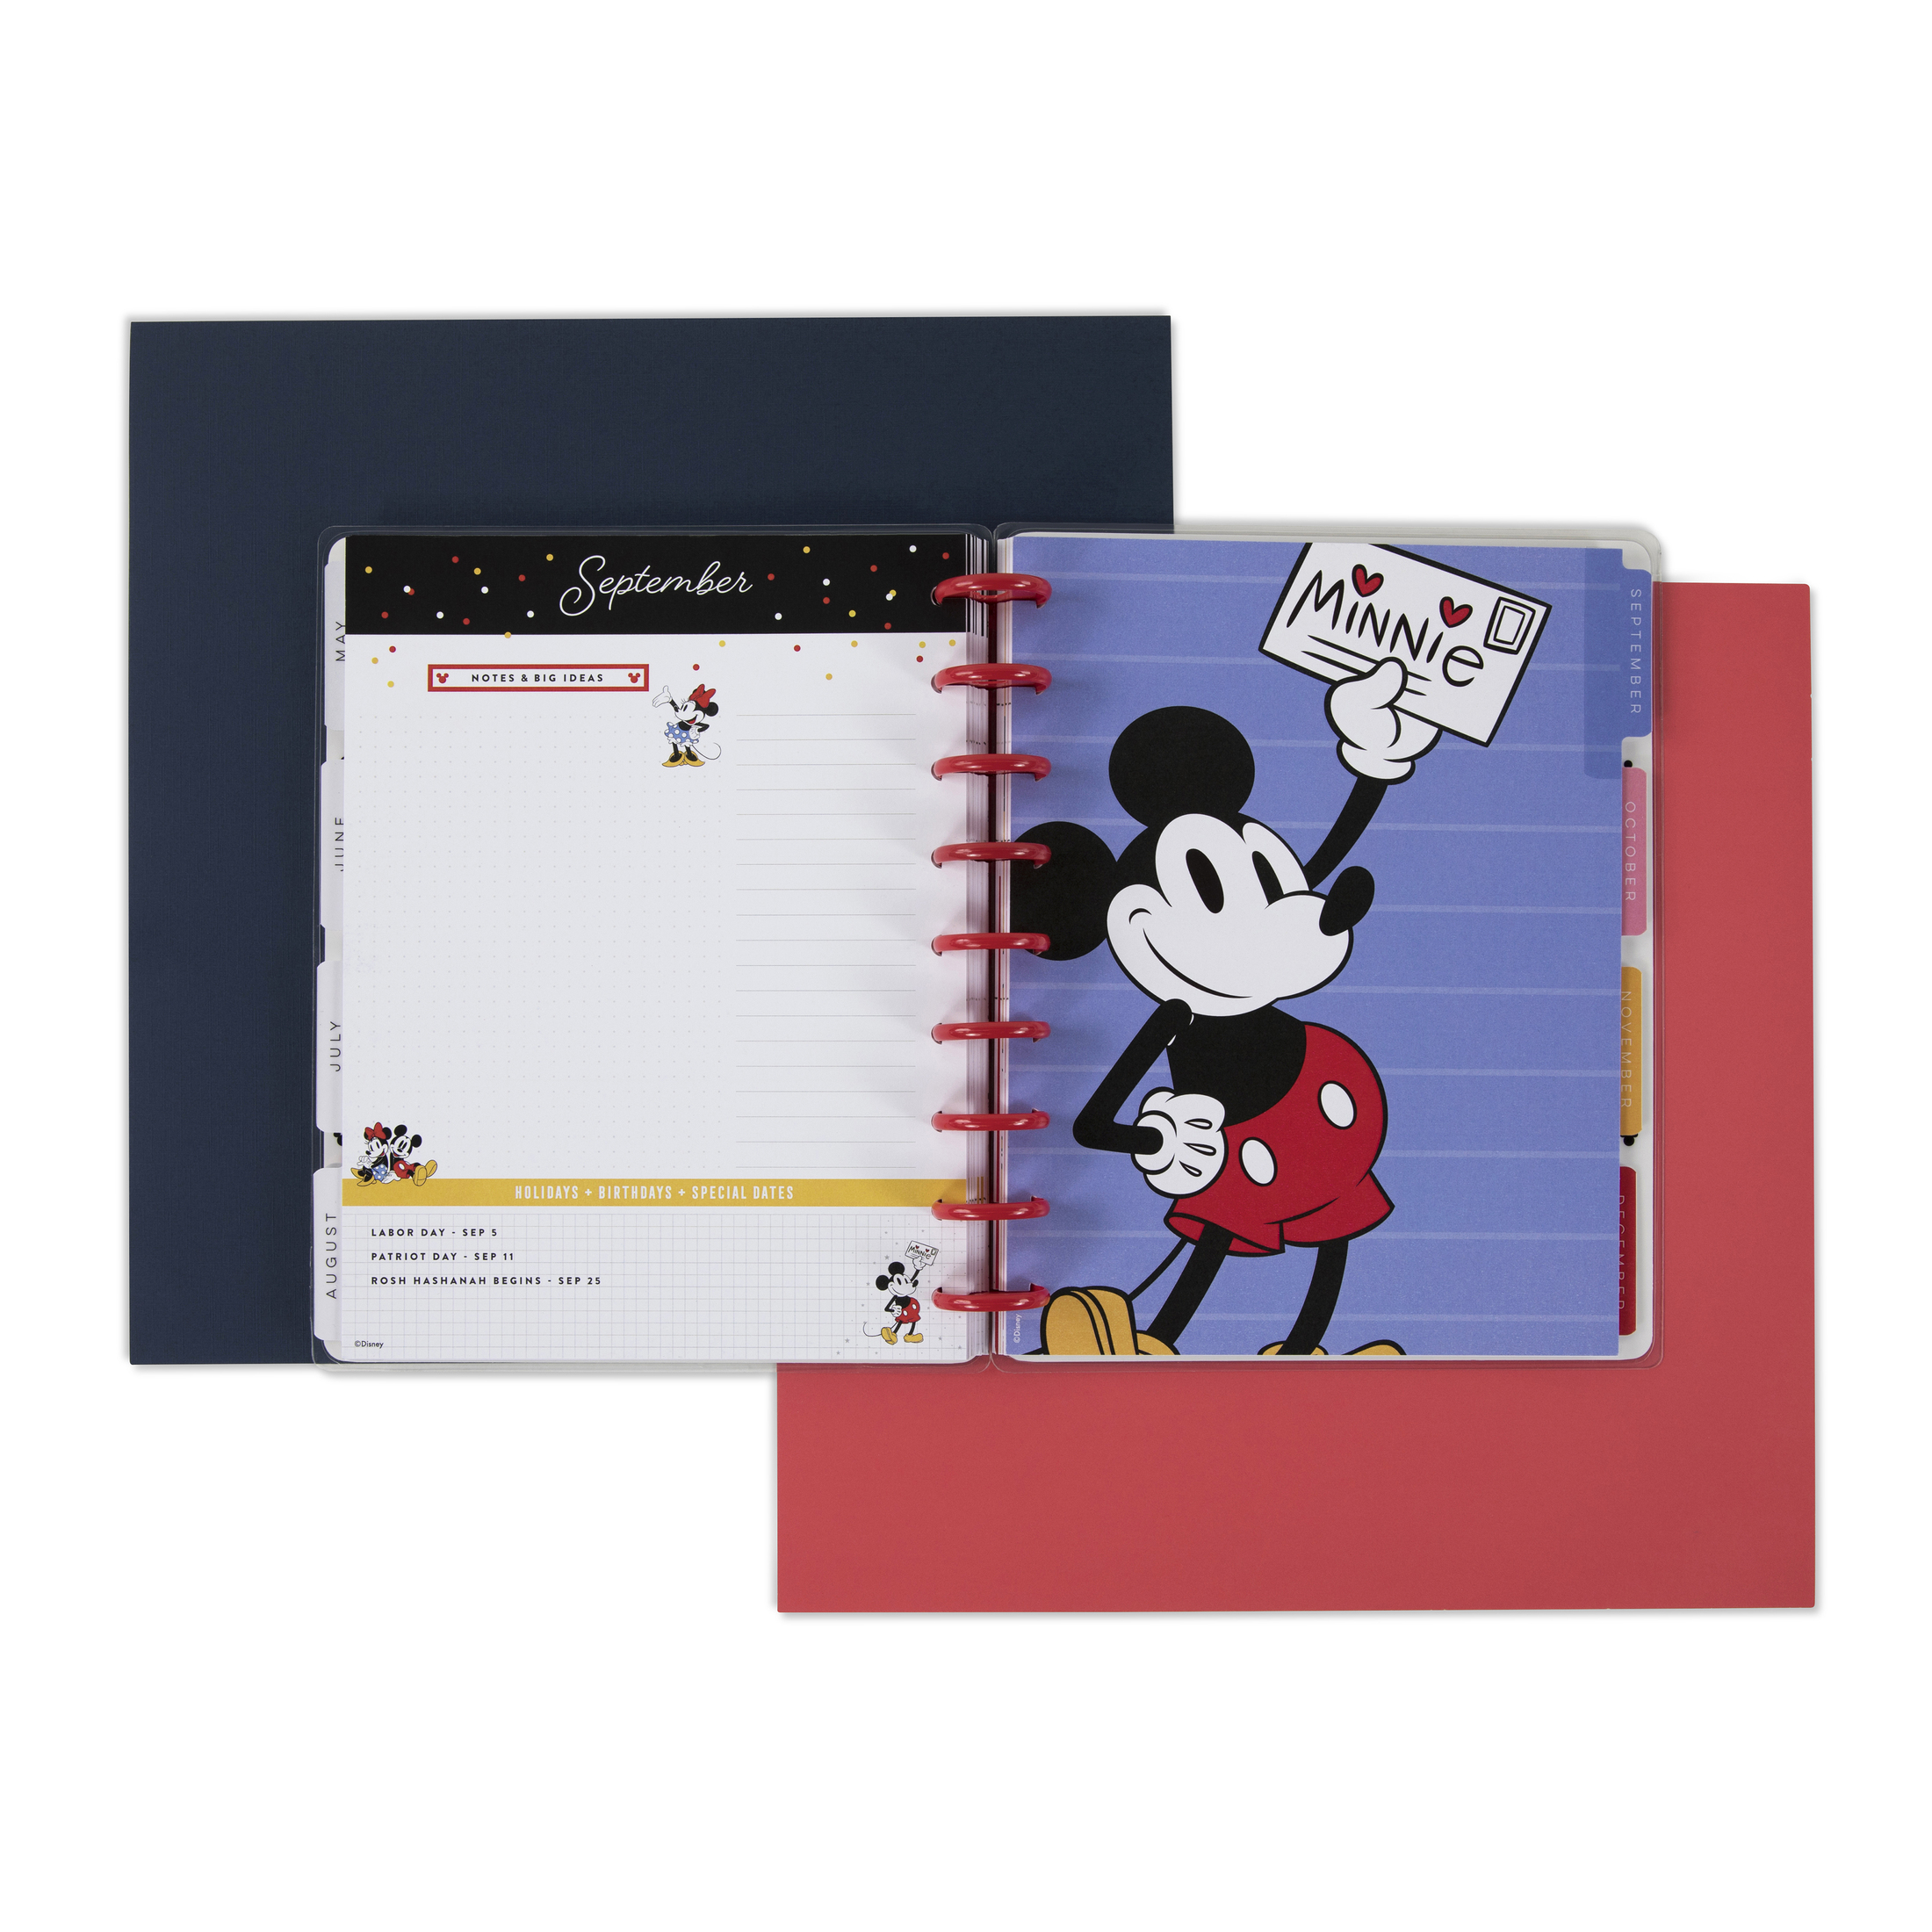 The Happy Planner, Disney, Mickey Mouse & Minnie Mouse Better Together Classic 12 Month Planner - image 3 of 11